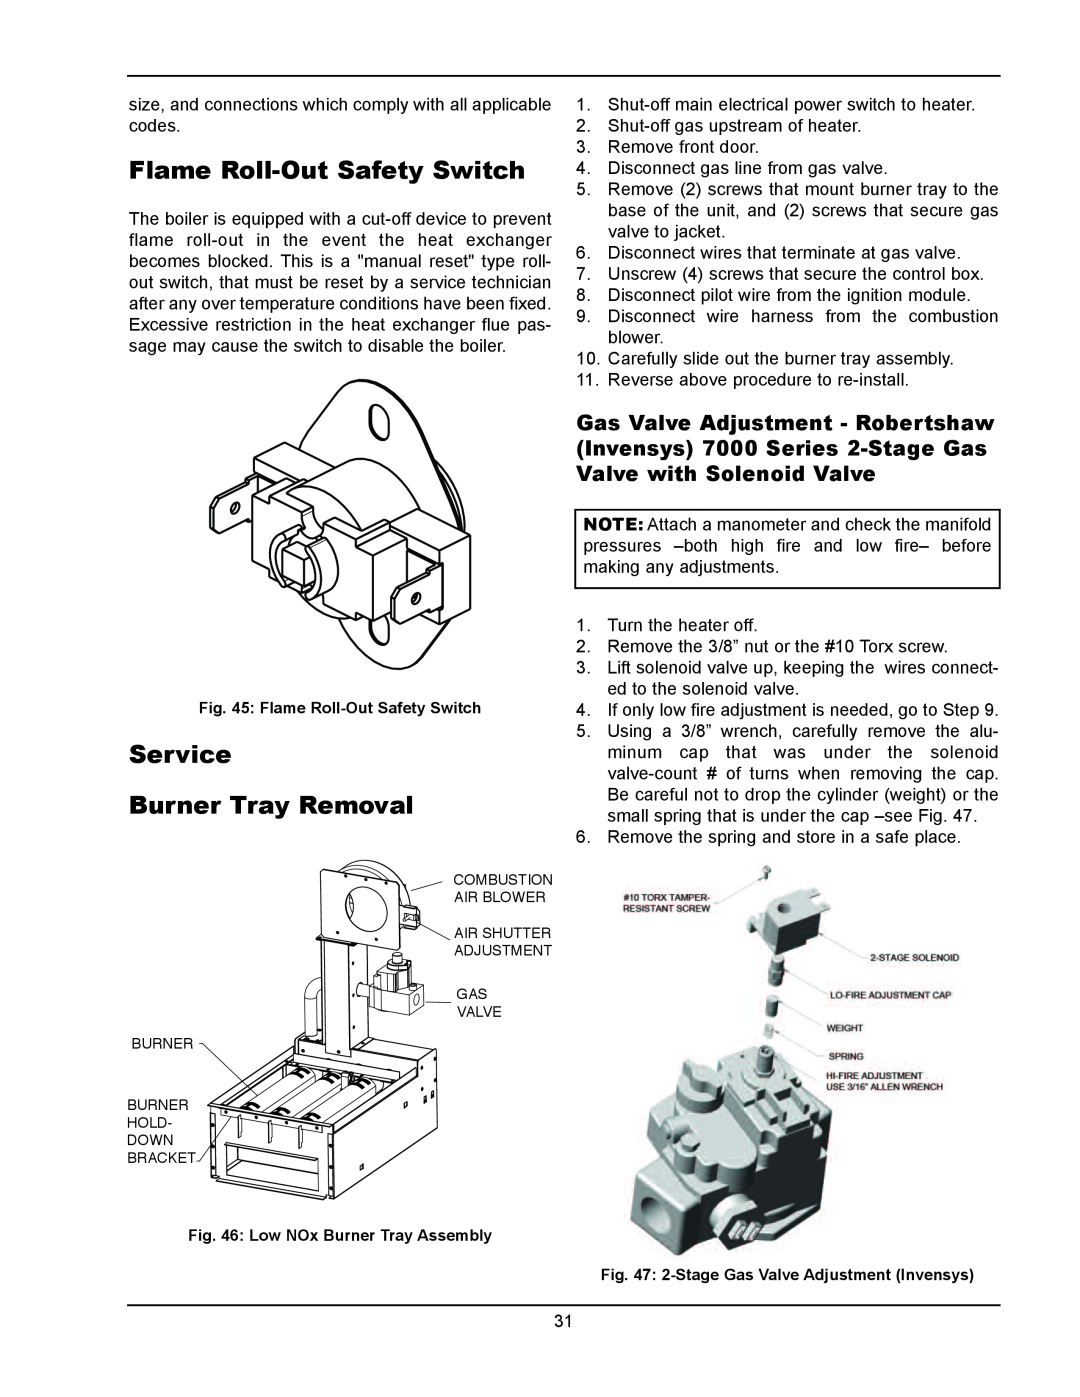 Raypak 133-4001 manual Flame Roll-OutSafety Switch, Service Burner Tray Removal 